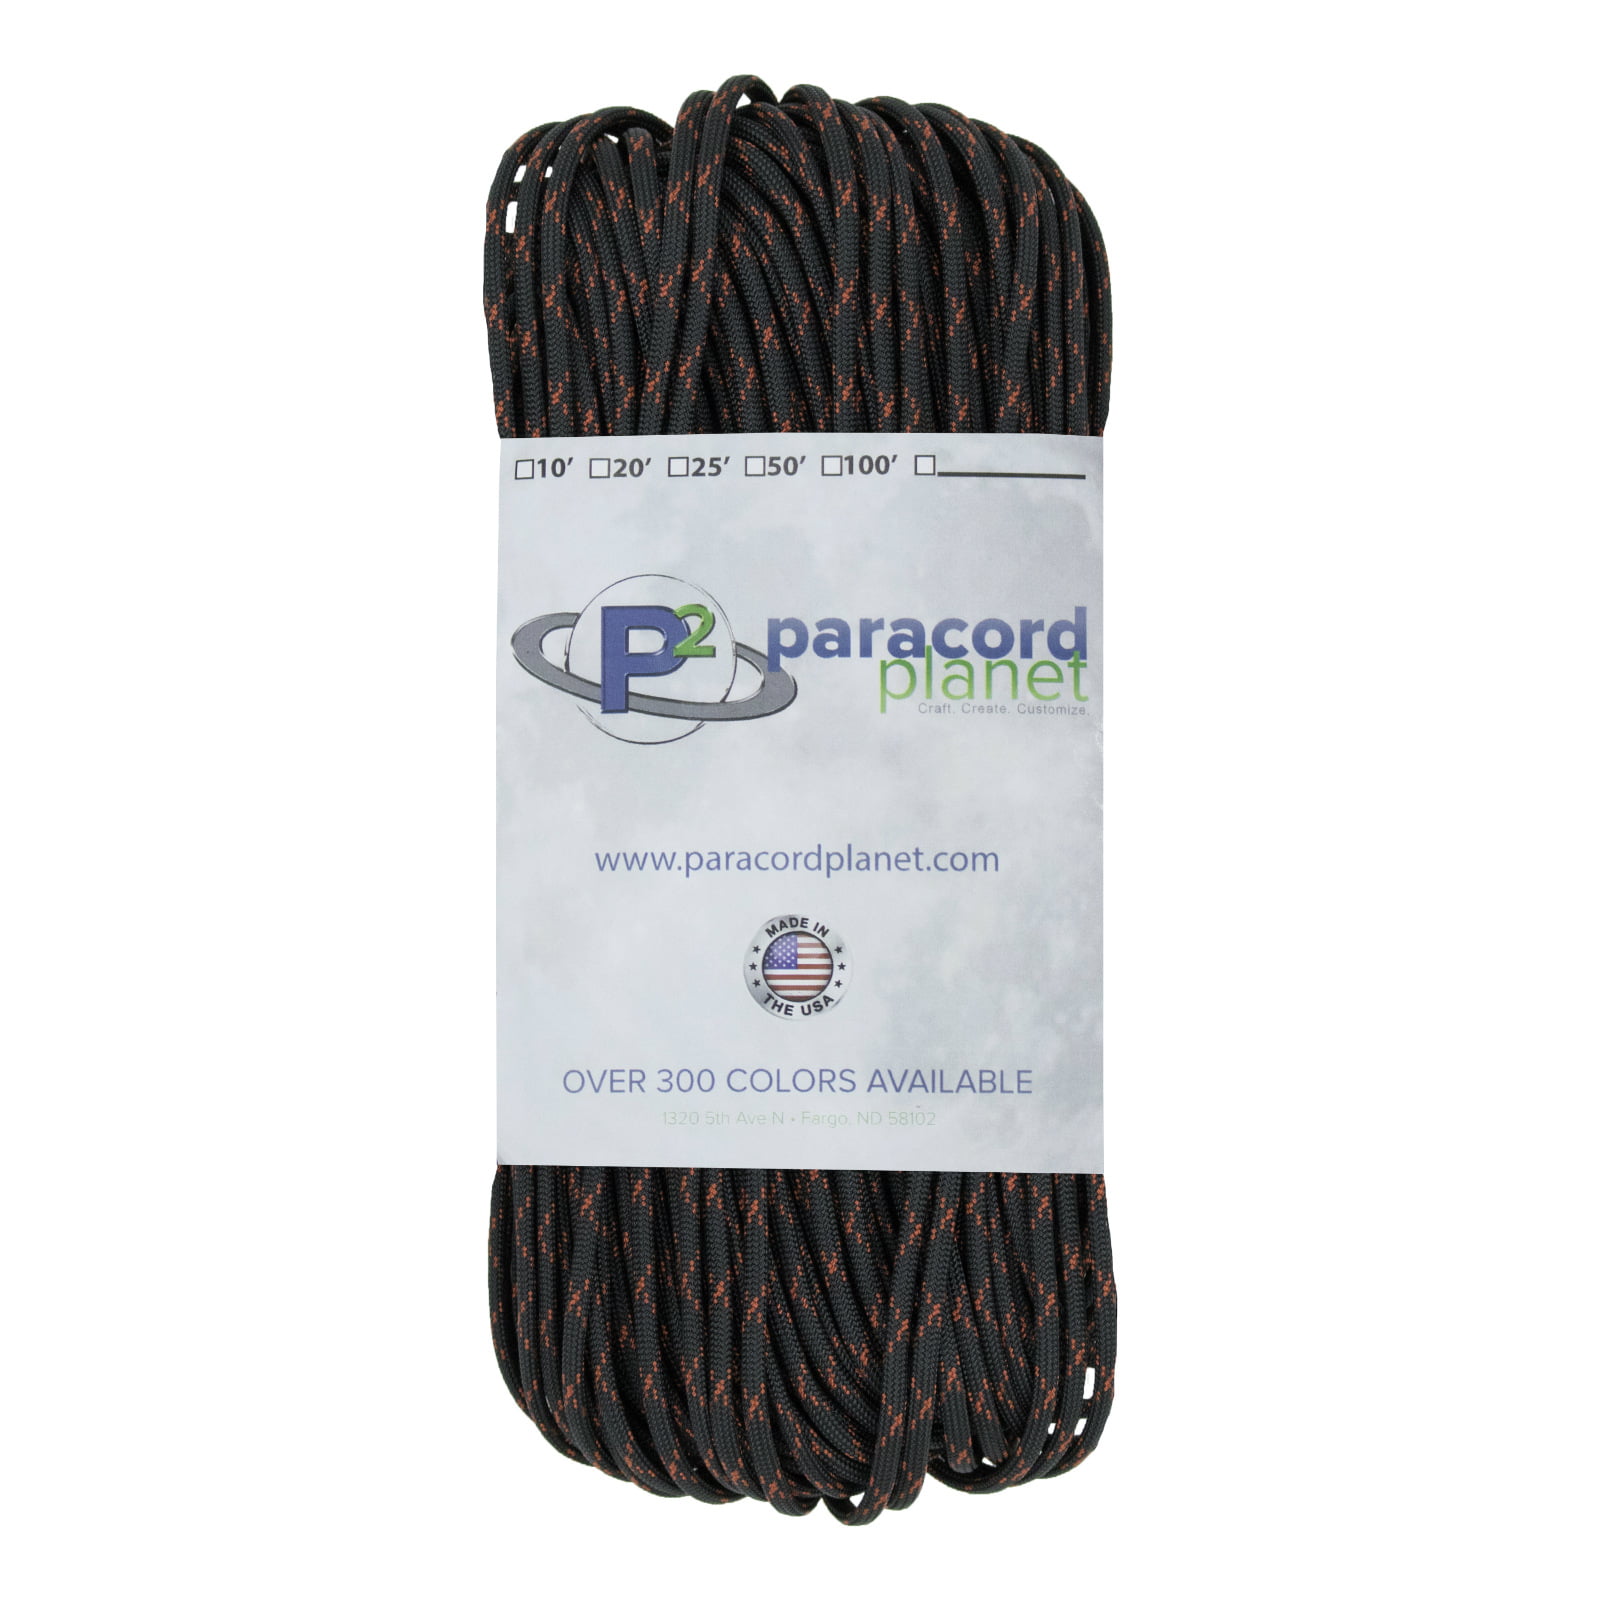 PARACORD PLANET Nylon Mil Spec Parachute 550 Cord Type III 7 Strand Paracord Over 200 Colors 10-1000 Choices 